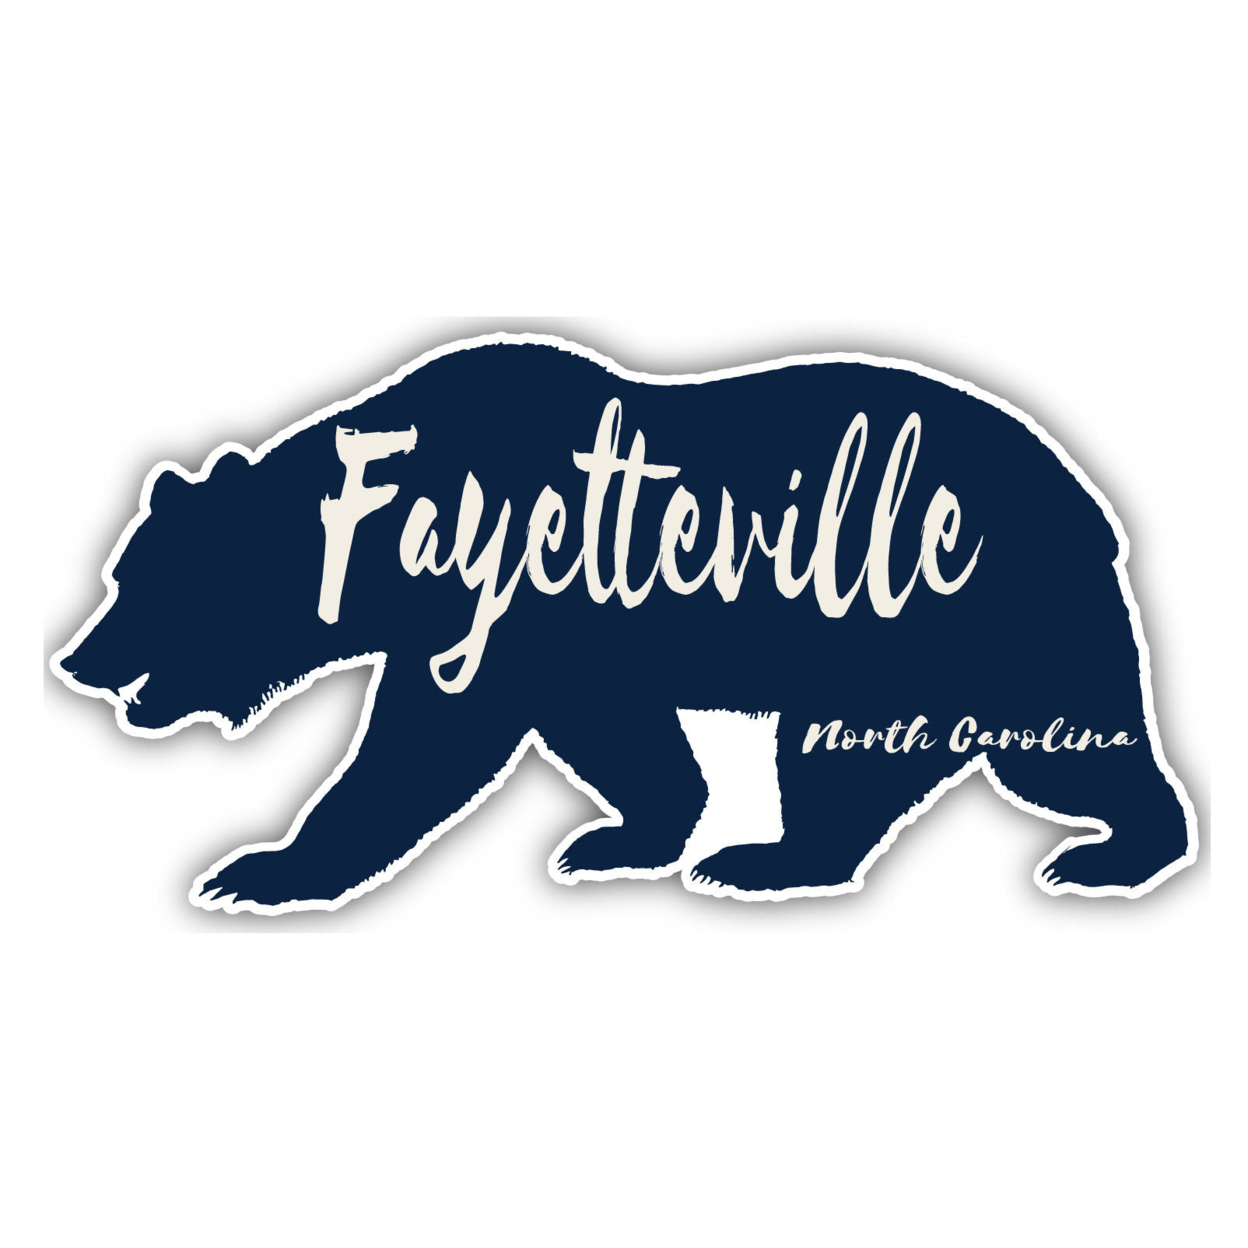 Fayetteville North Carolina Souvenir Decorative Stickers (Choose Theme And Size) - 4-Pack, 4-Inch, Tent